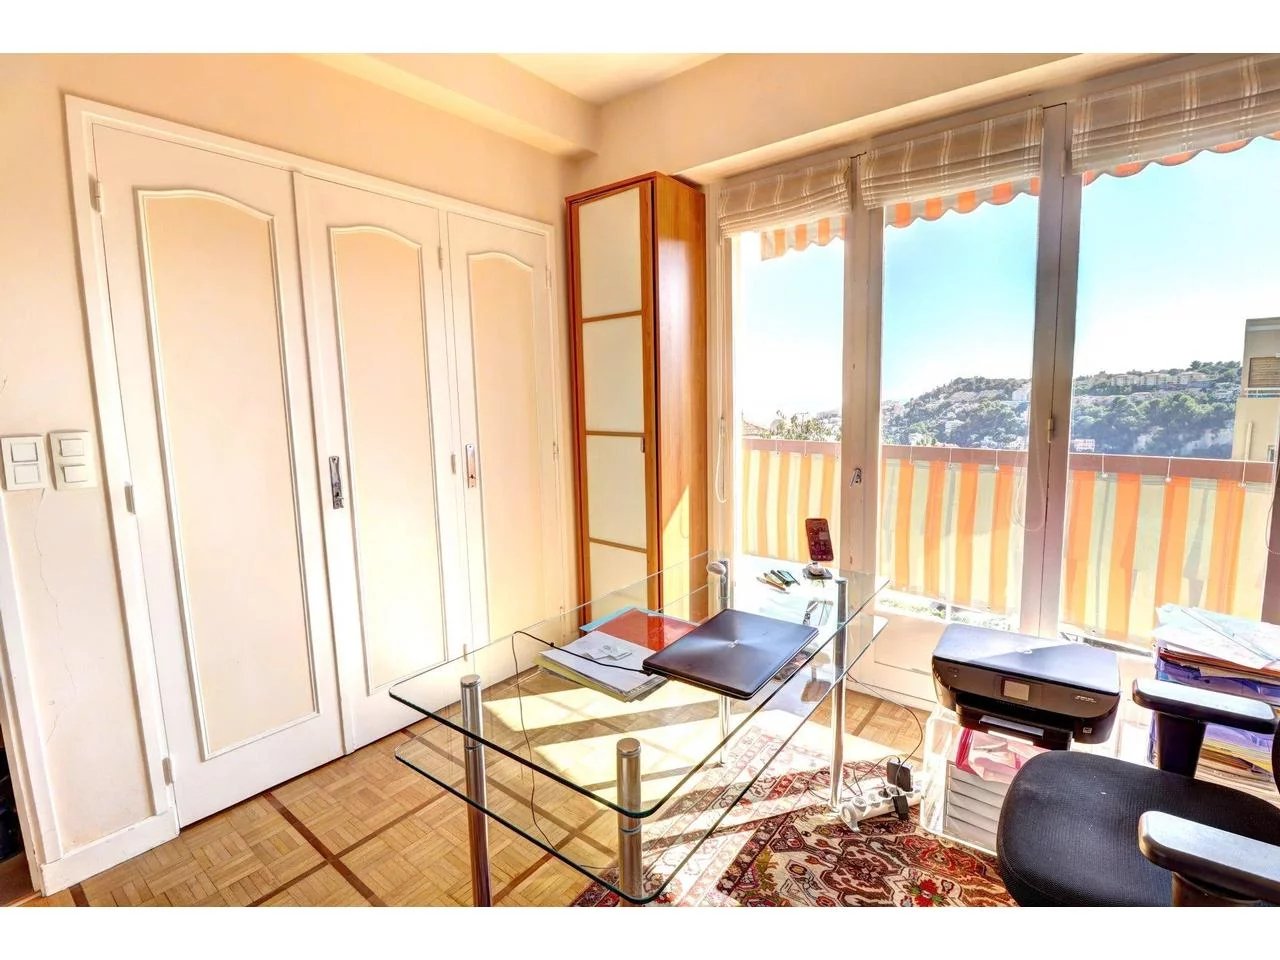 Appartement  4 Rooms 104m2  for sale   519 000 €